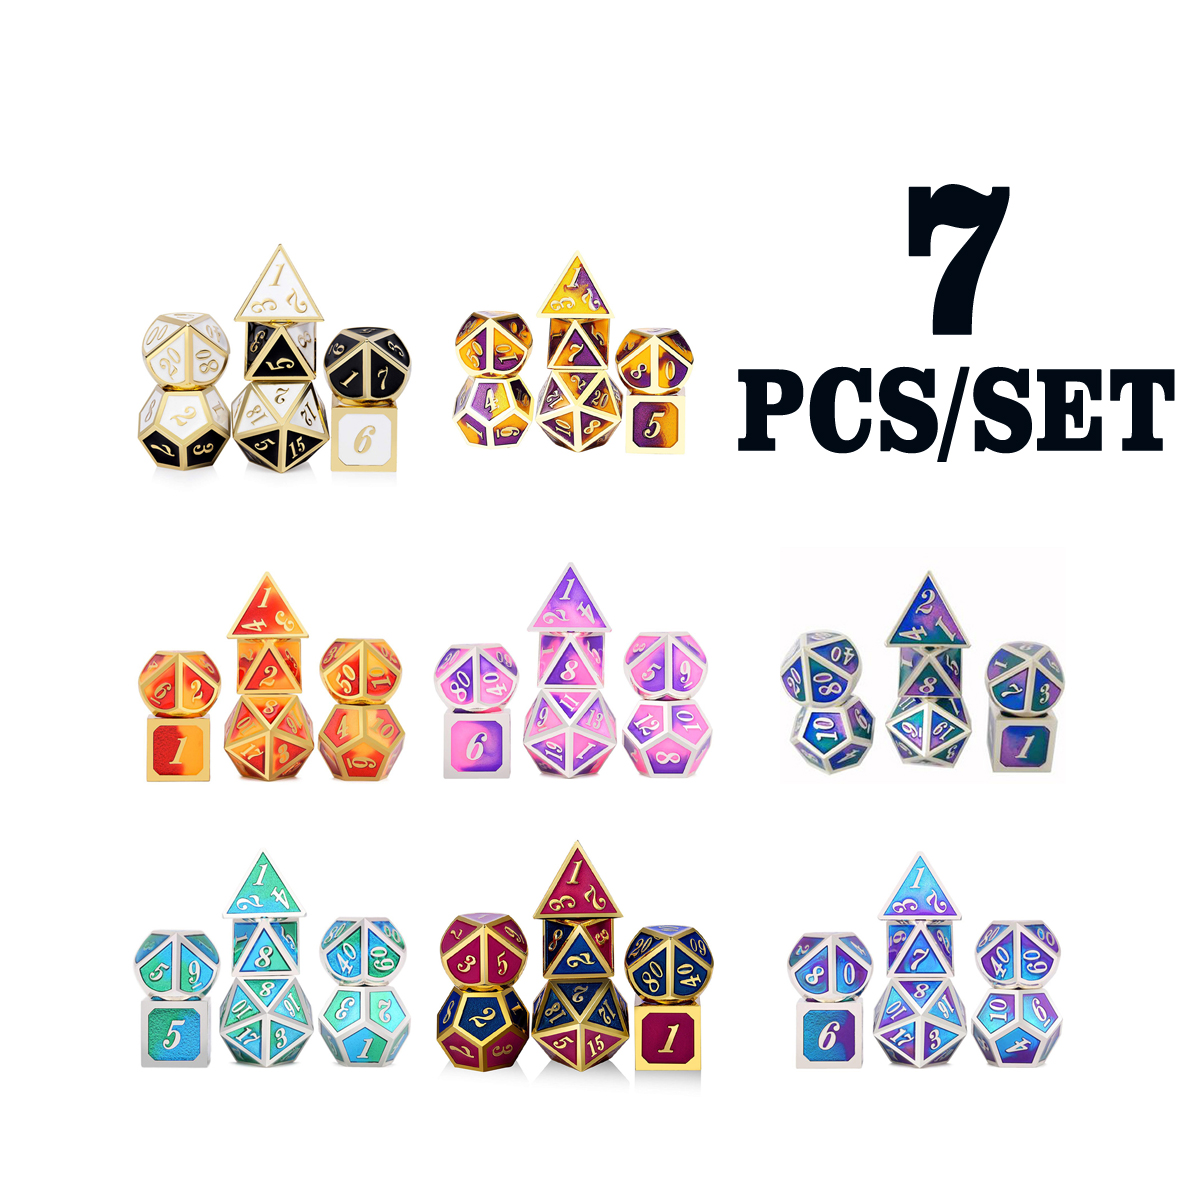 7PCSSET-Creative-Metal-Multi-faced-Dice-Set-Heavy-Duty-Polyhedral-Dices-Role-Playing-Game-Party-Game-1584212-4